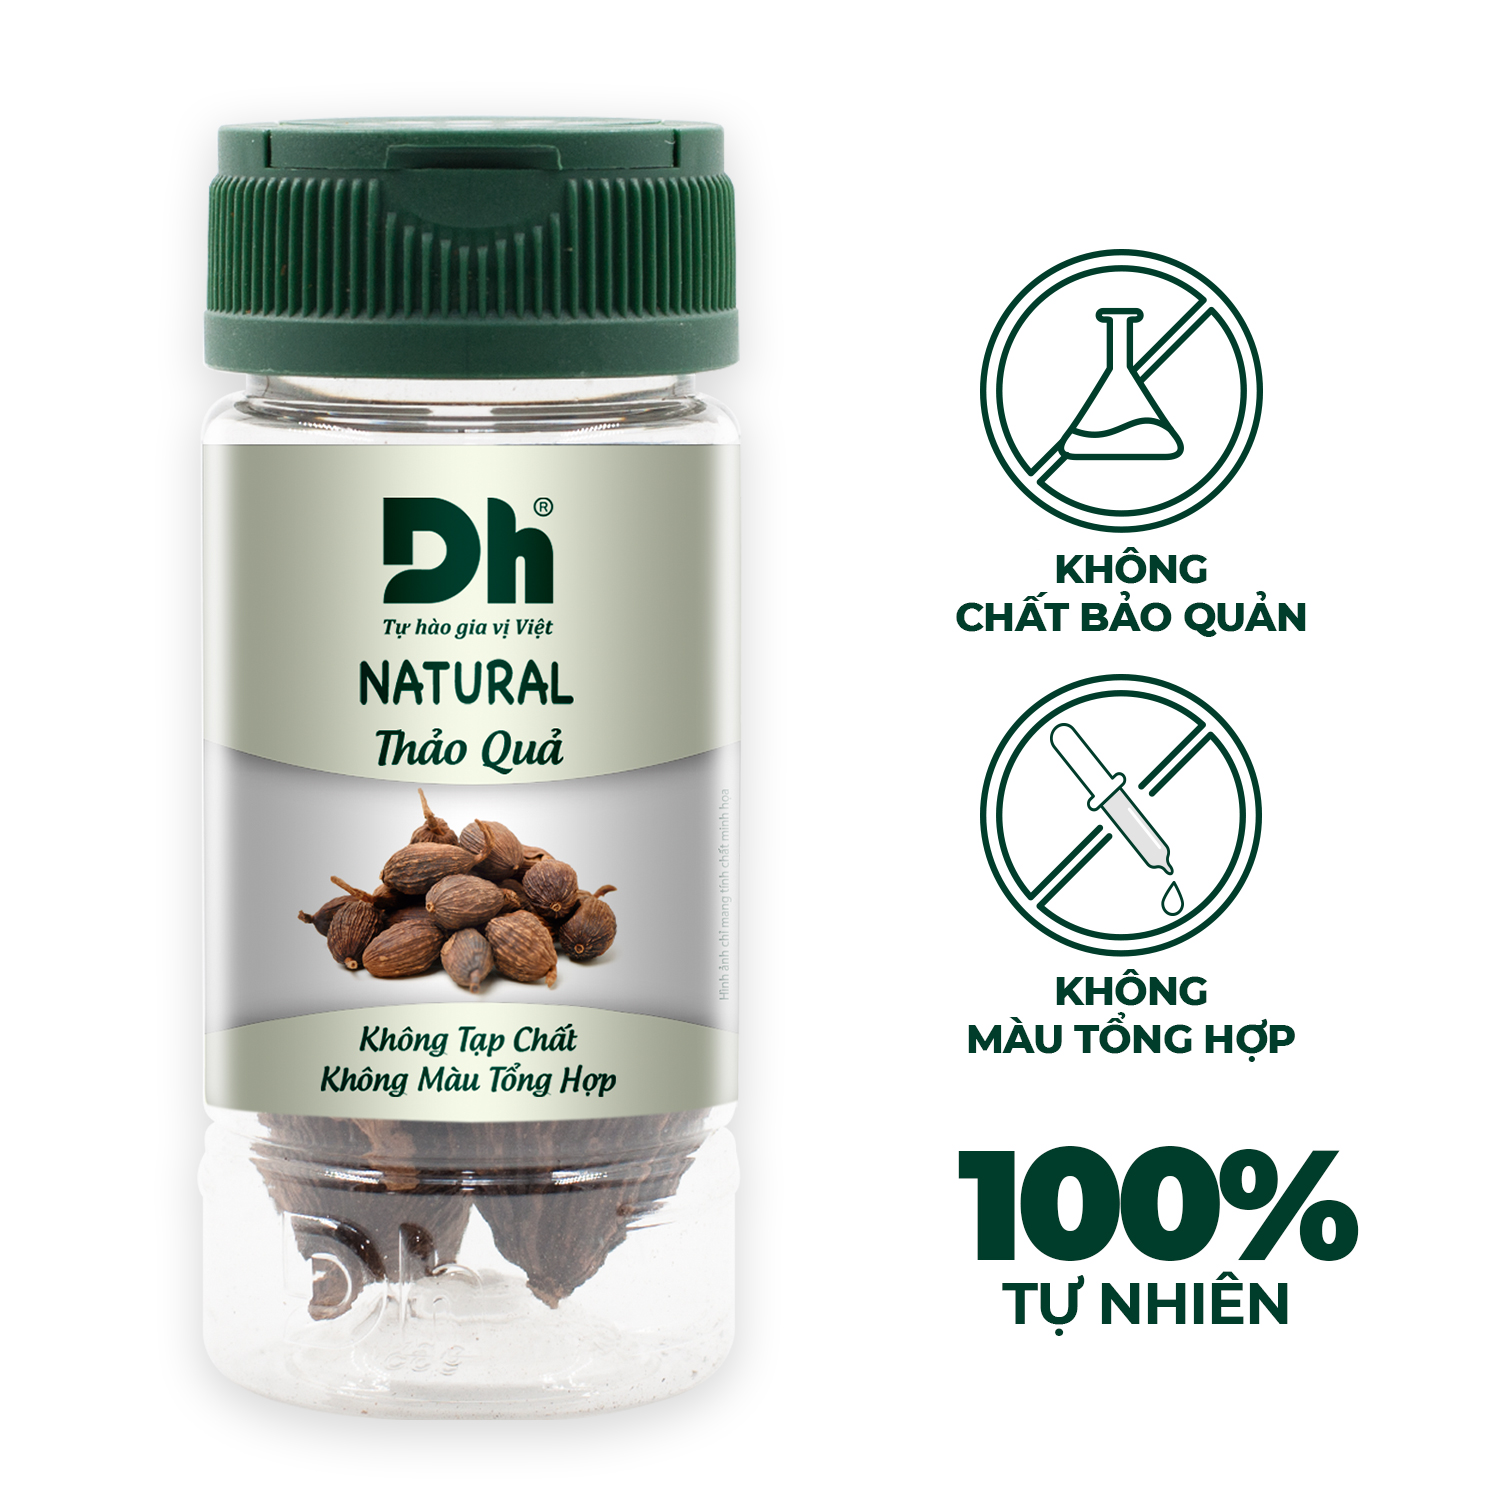 Natural Thảo Quả 20gr Dh Foods